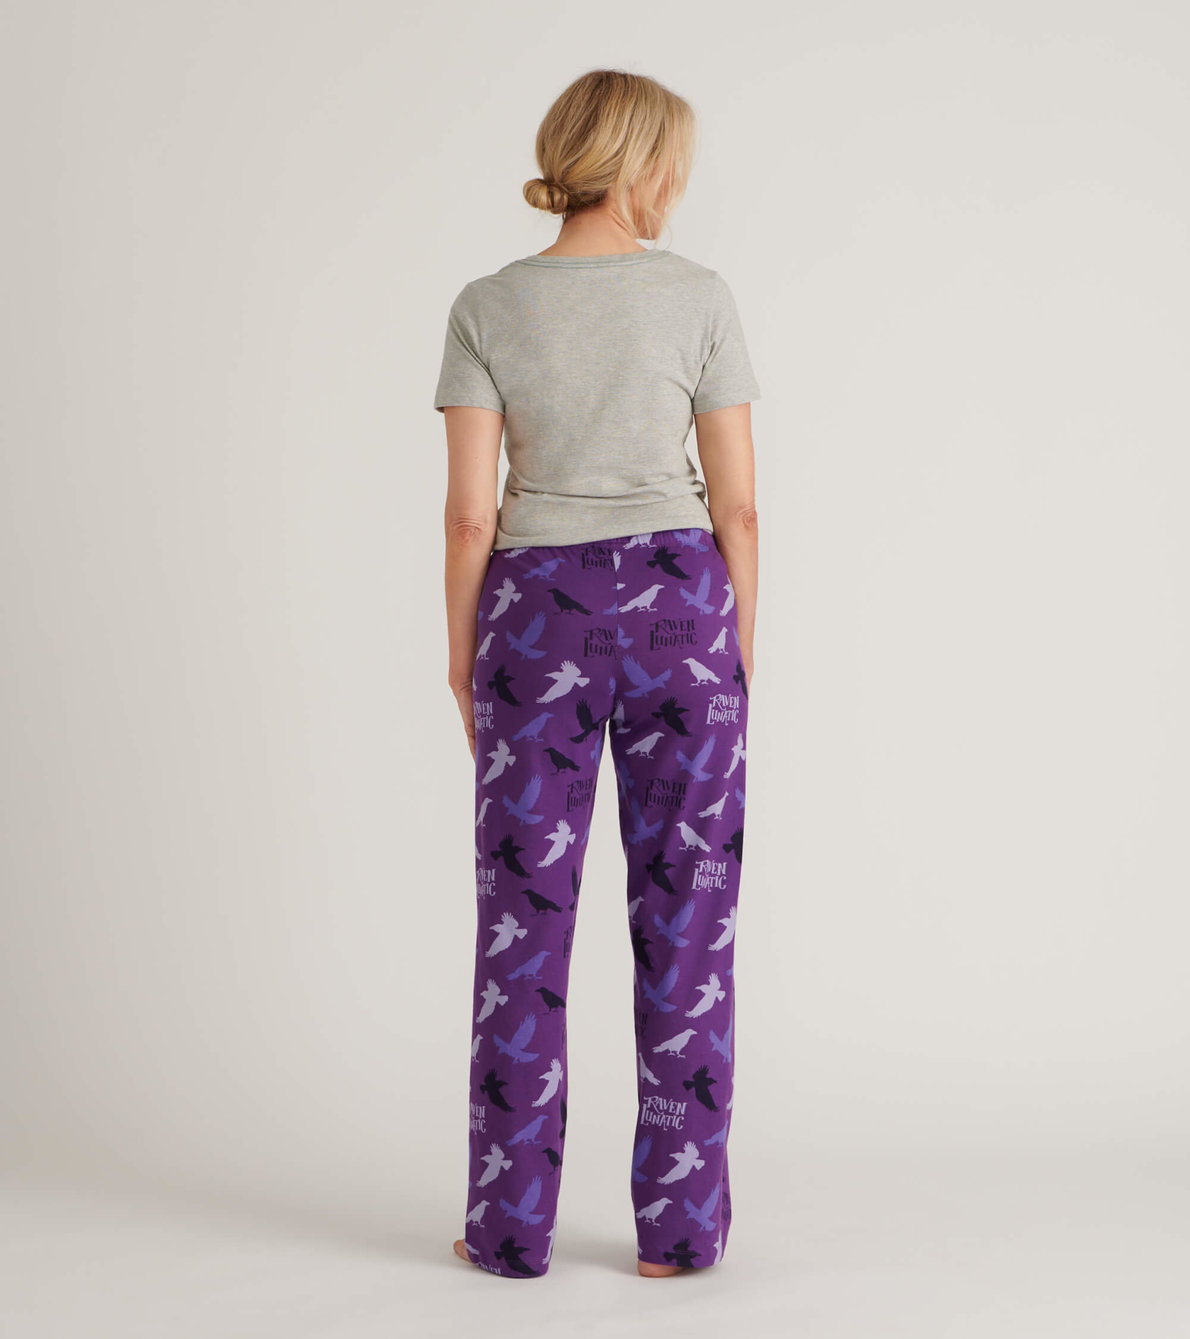 View larger image of Raven Lunatic Women's Tee and Pants Pajama Separates